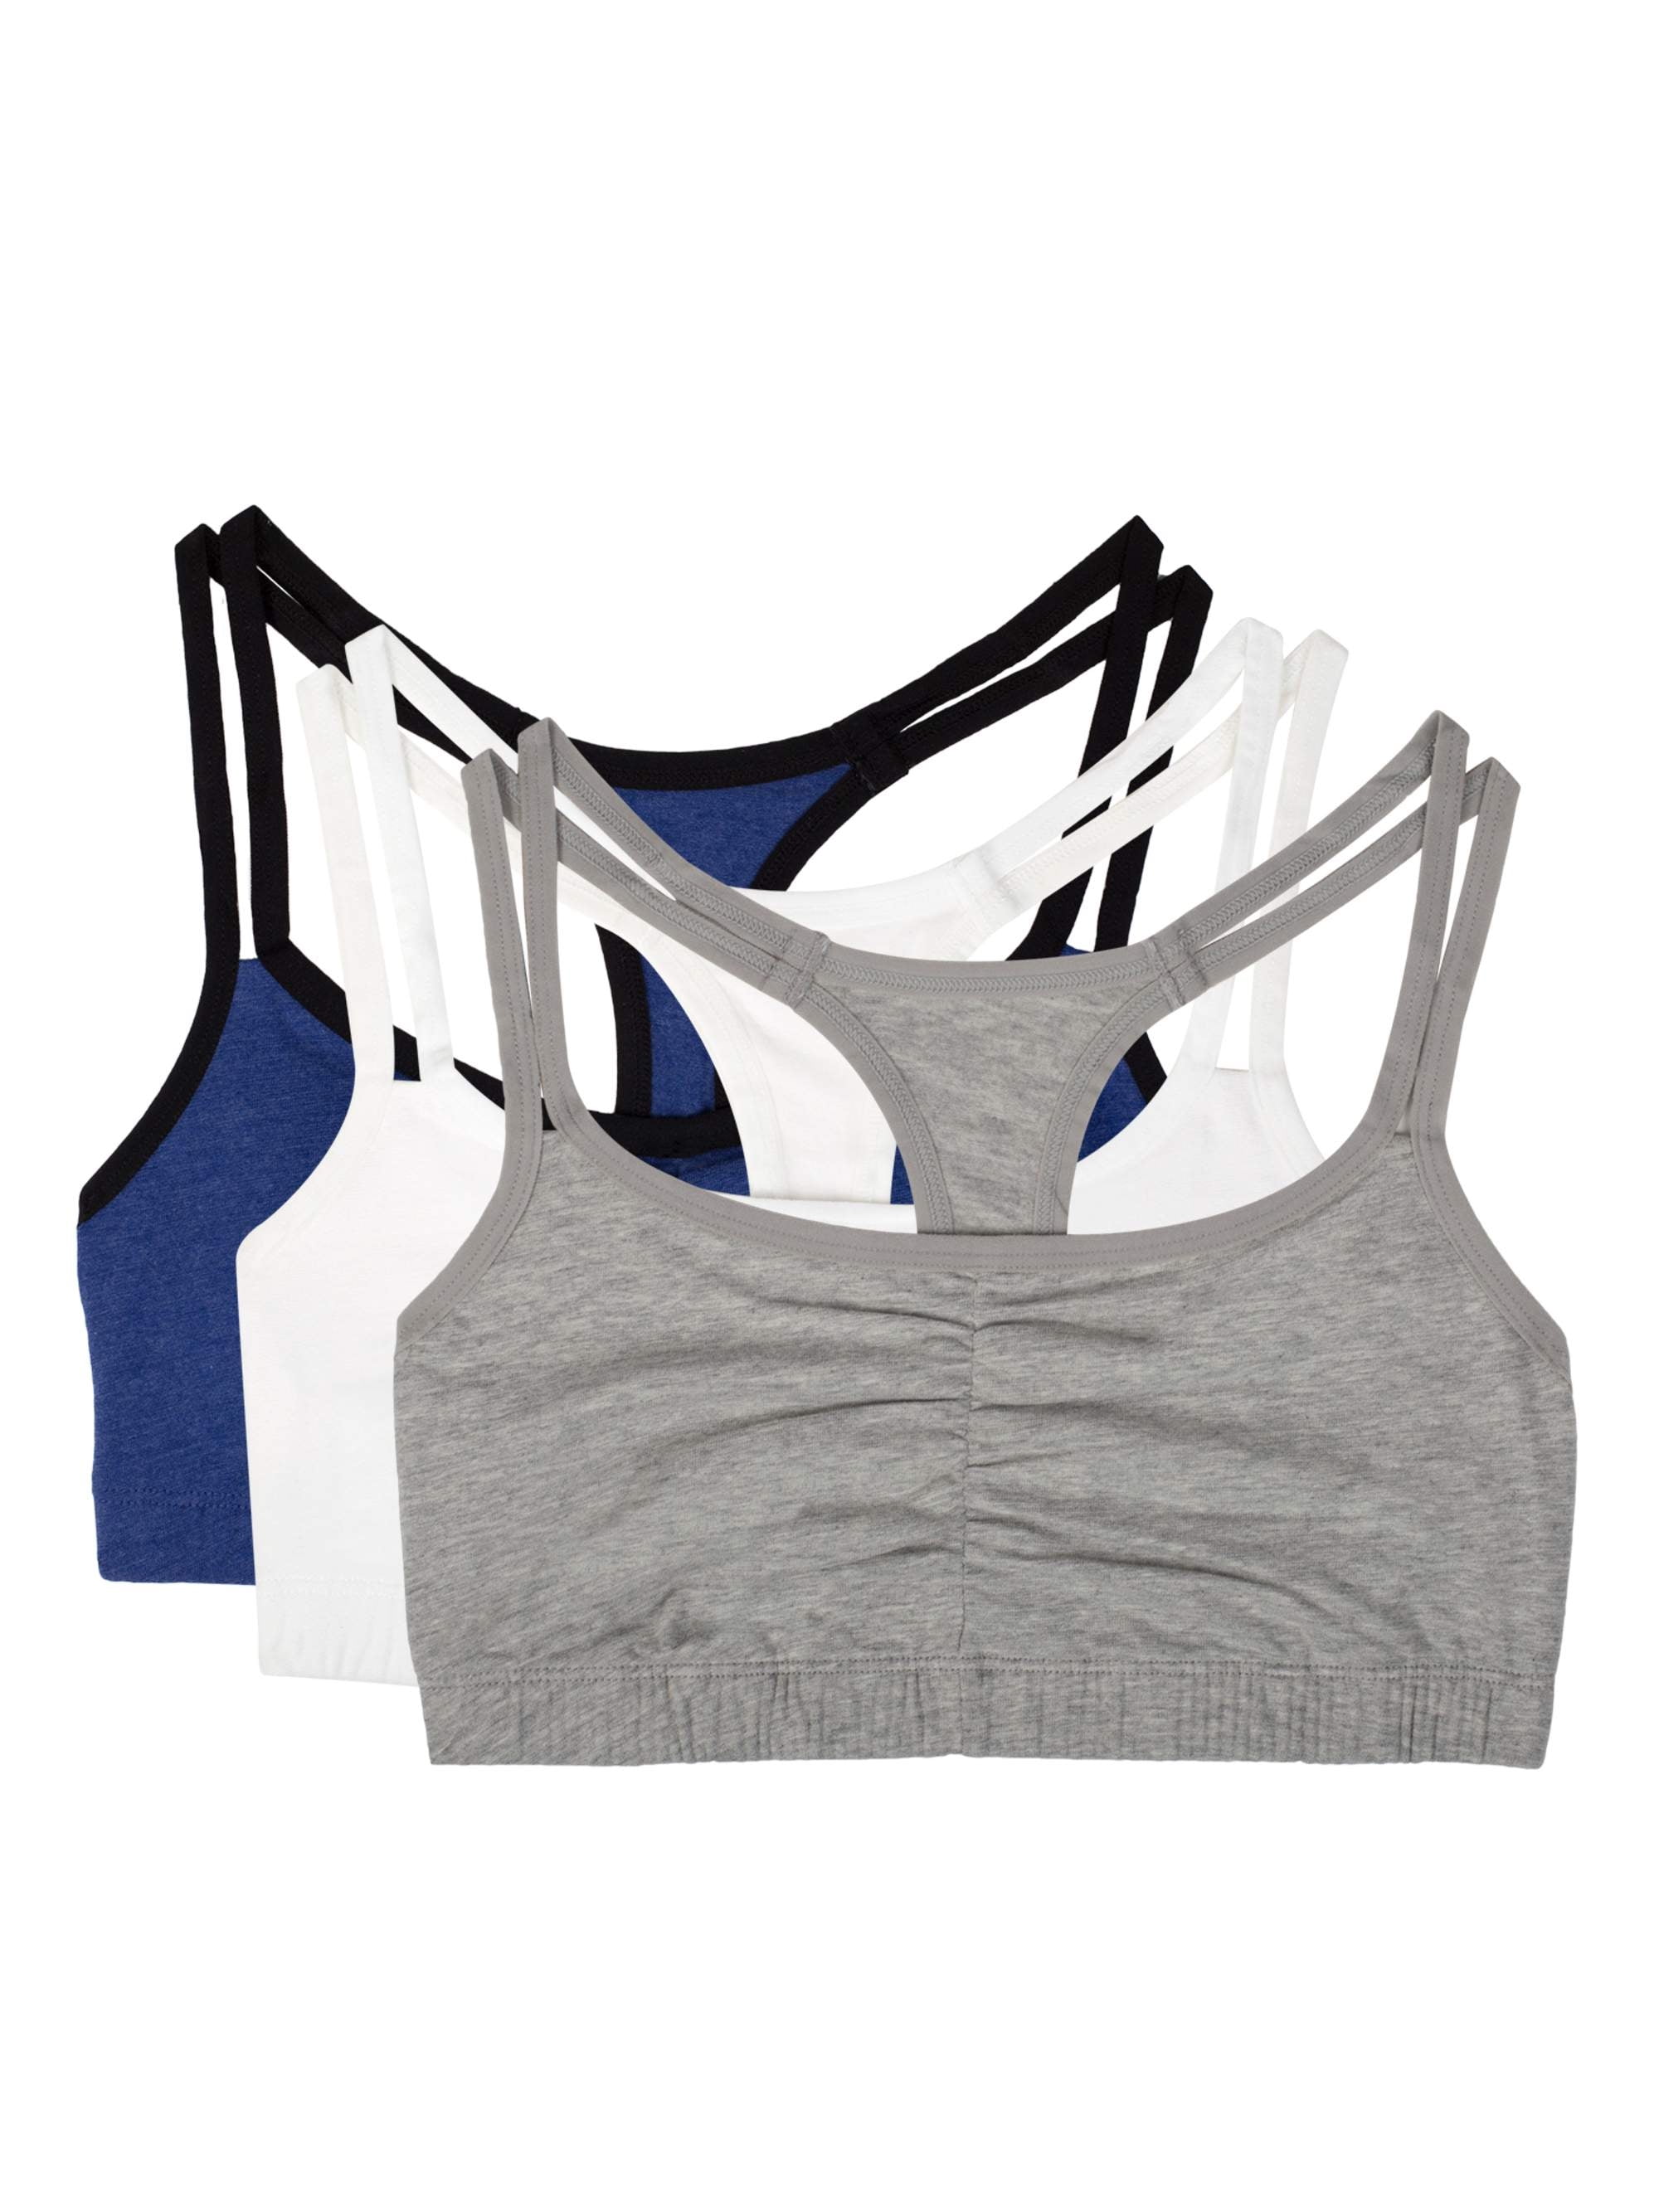 Fruit of the Loom Women's Tank Style Cotton Sports Bra 3-Pack Rose  Impression Print/White/Blue 38